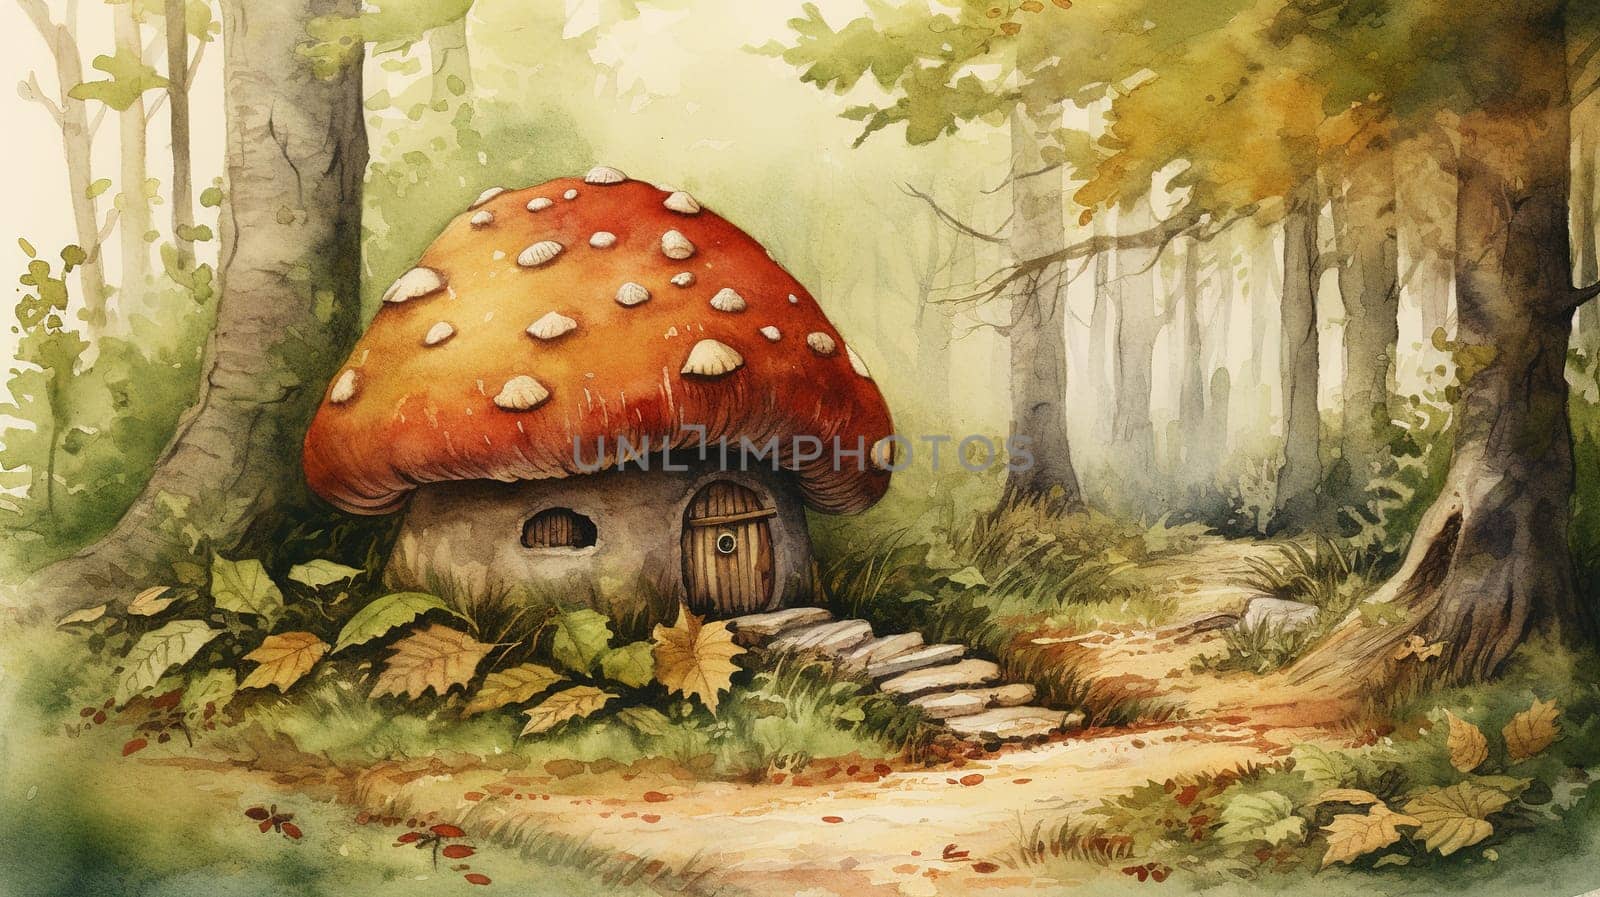 fairy house in the shape of a mushroom with a red roof similar to a fly agaric mushroom cap, for fairies in the forest by KaterinaDalemans